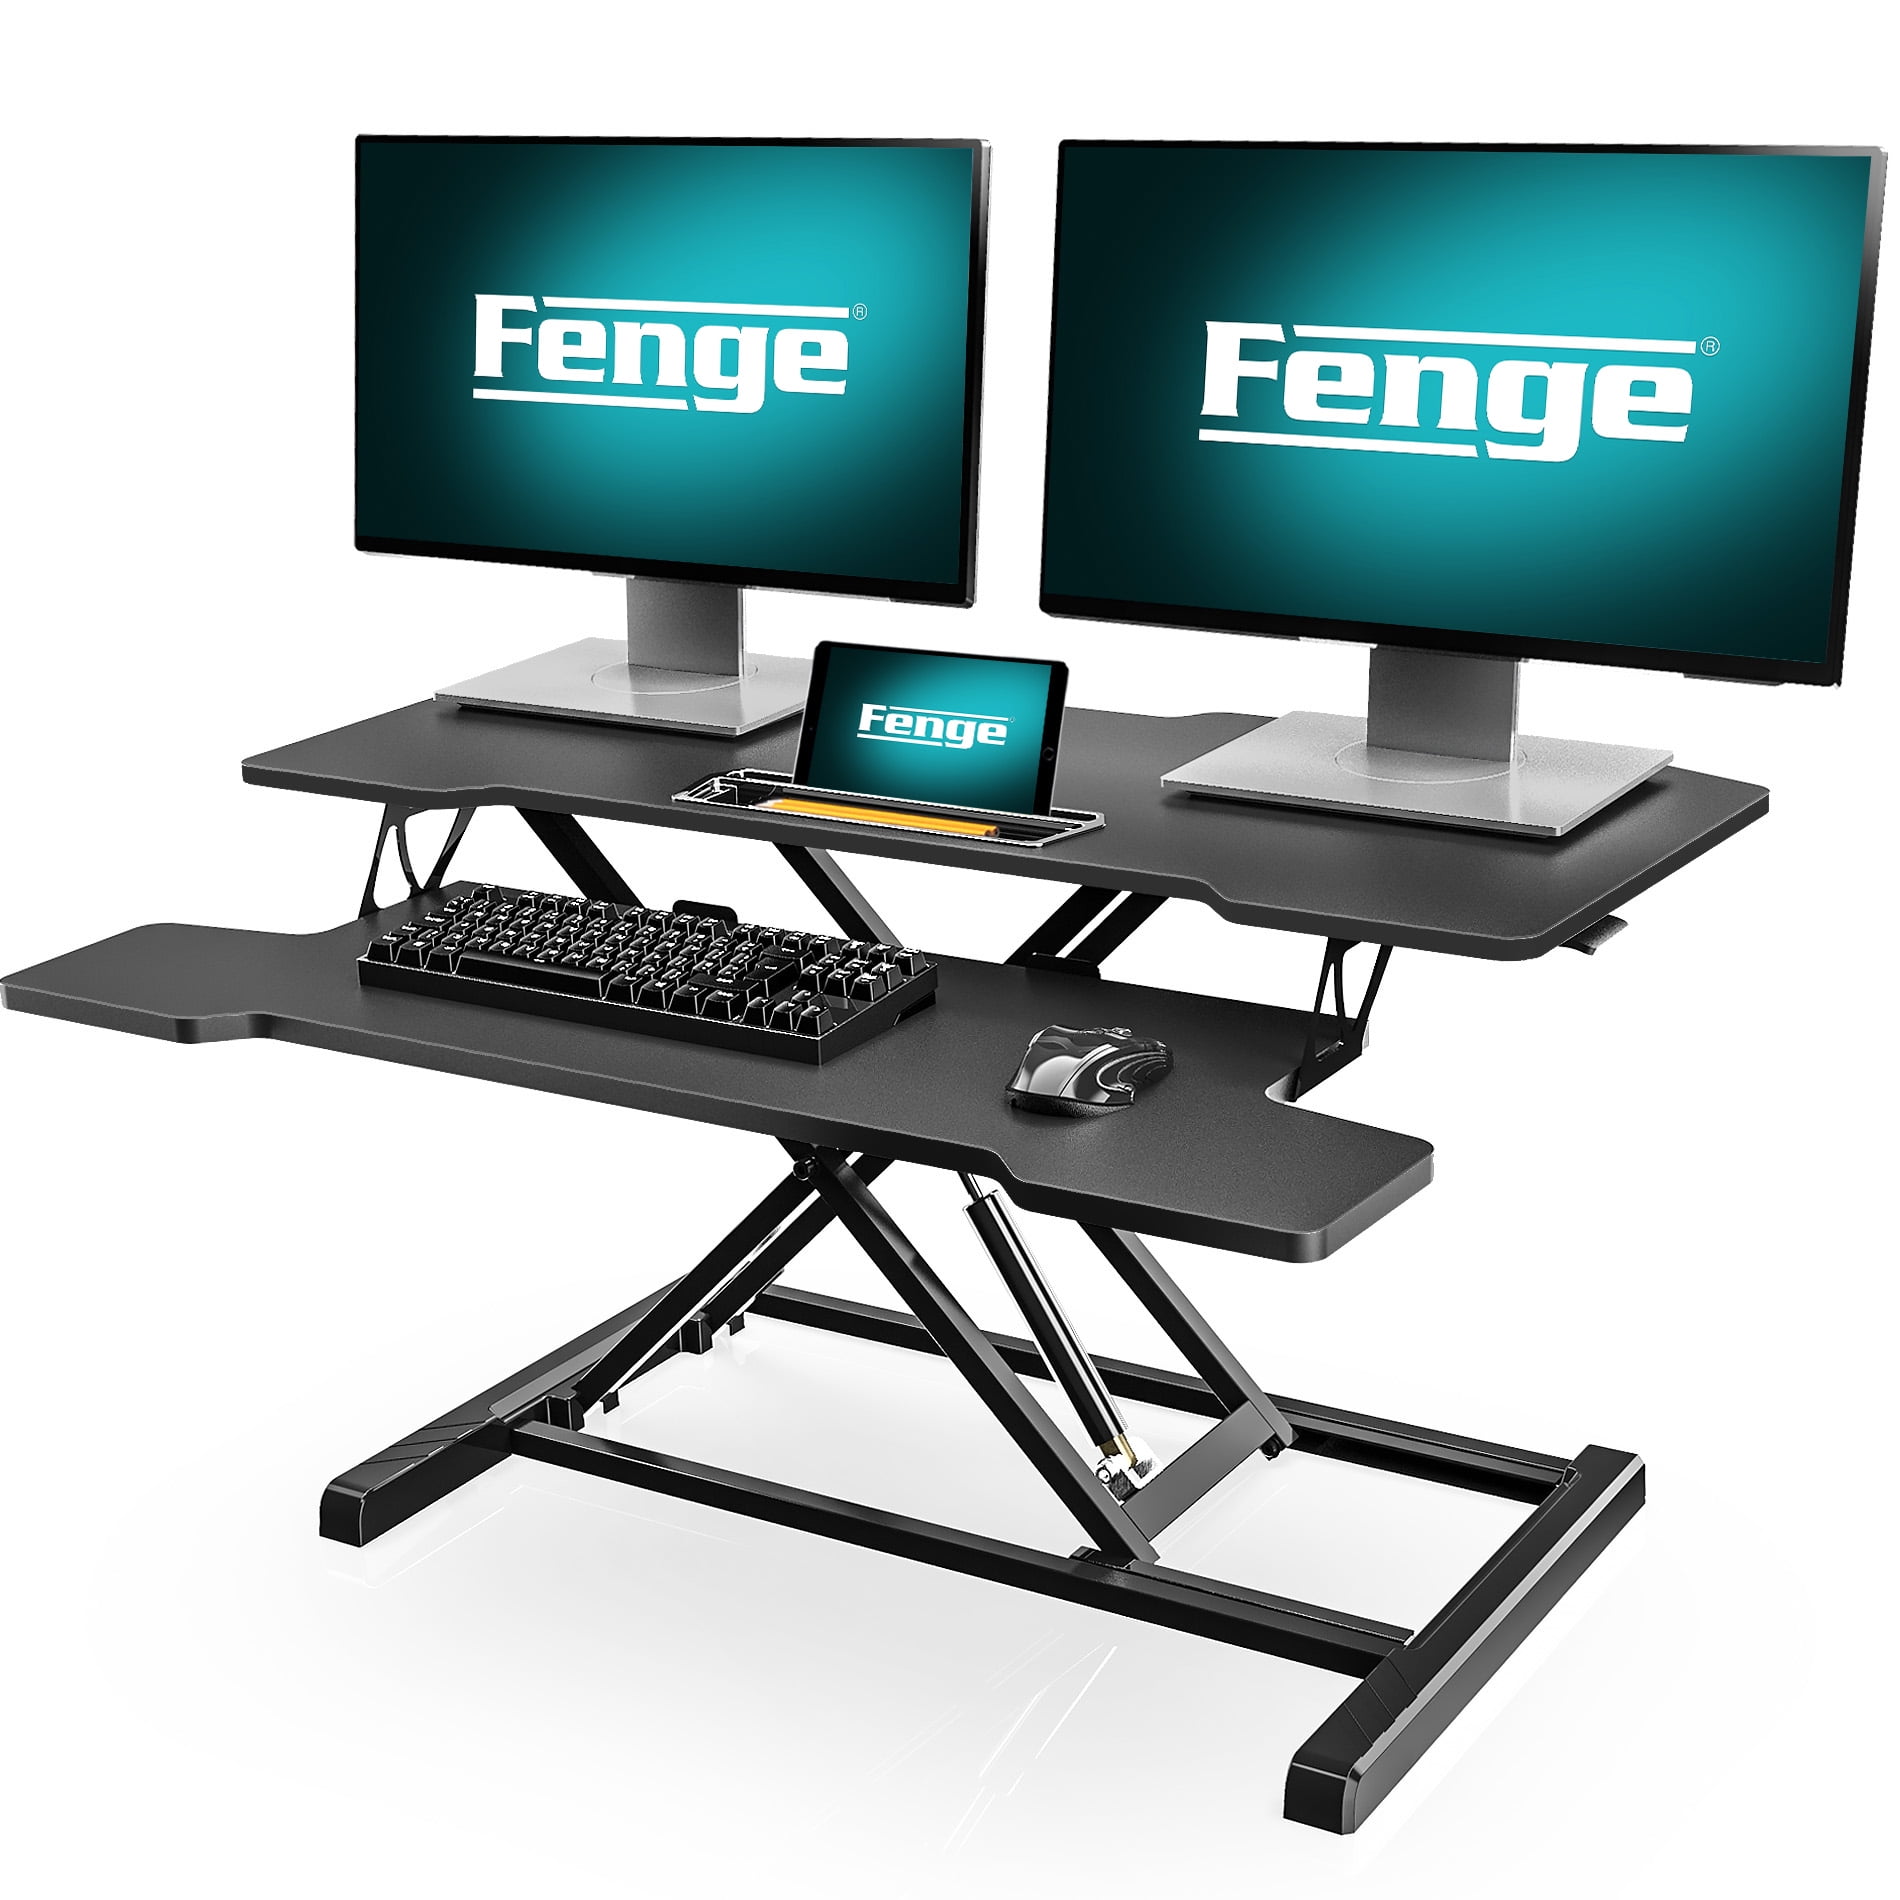 FENGE 36 inch Standing Desk Stand Adjustable Sit to Stand Up Stand Cube ...